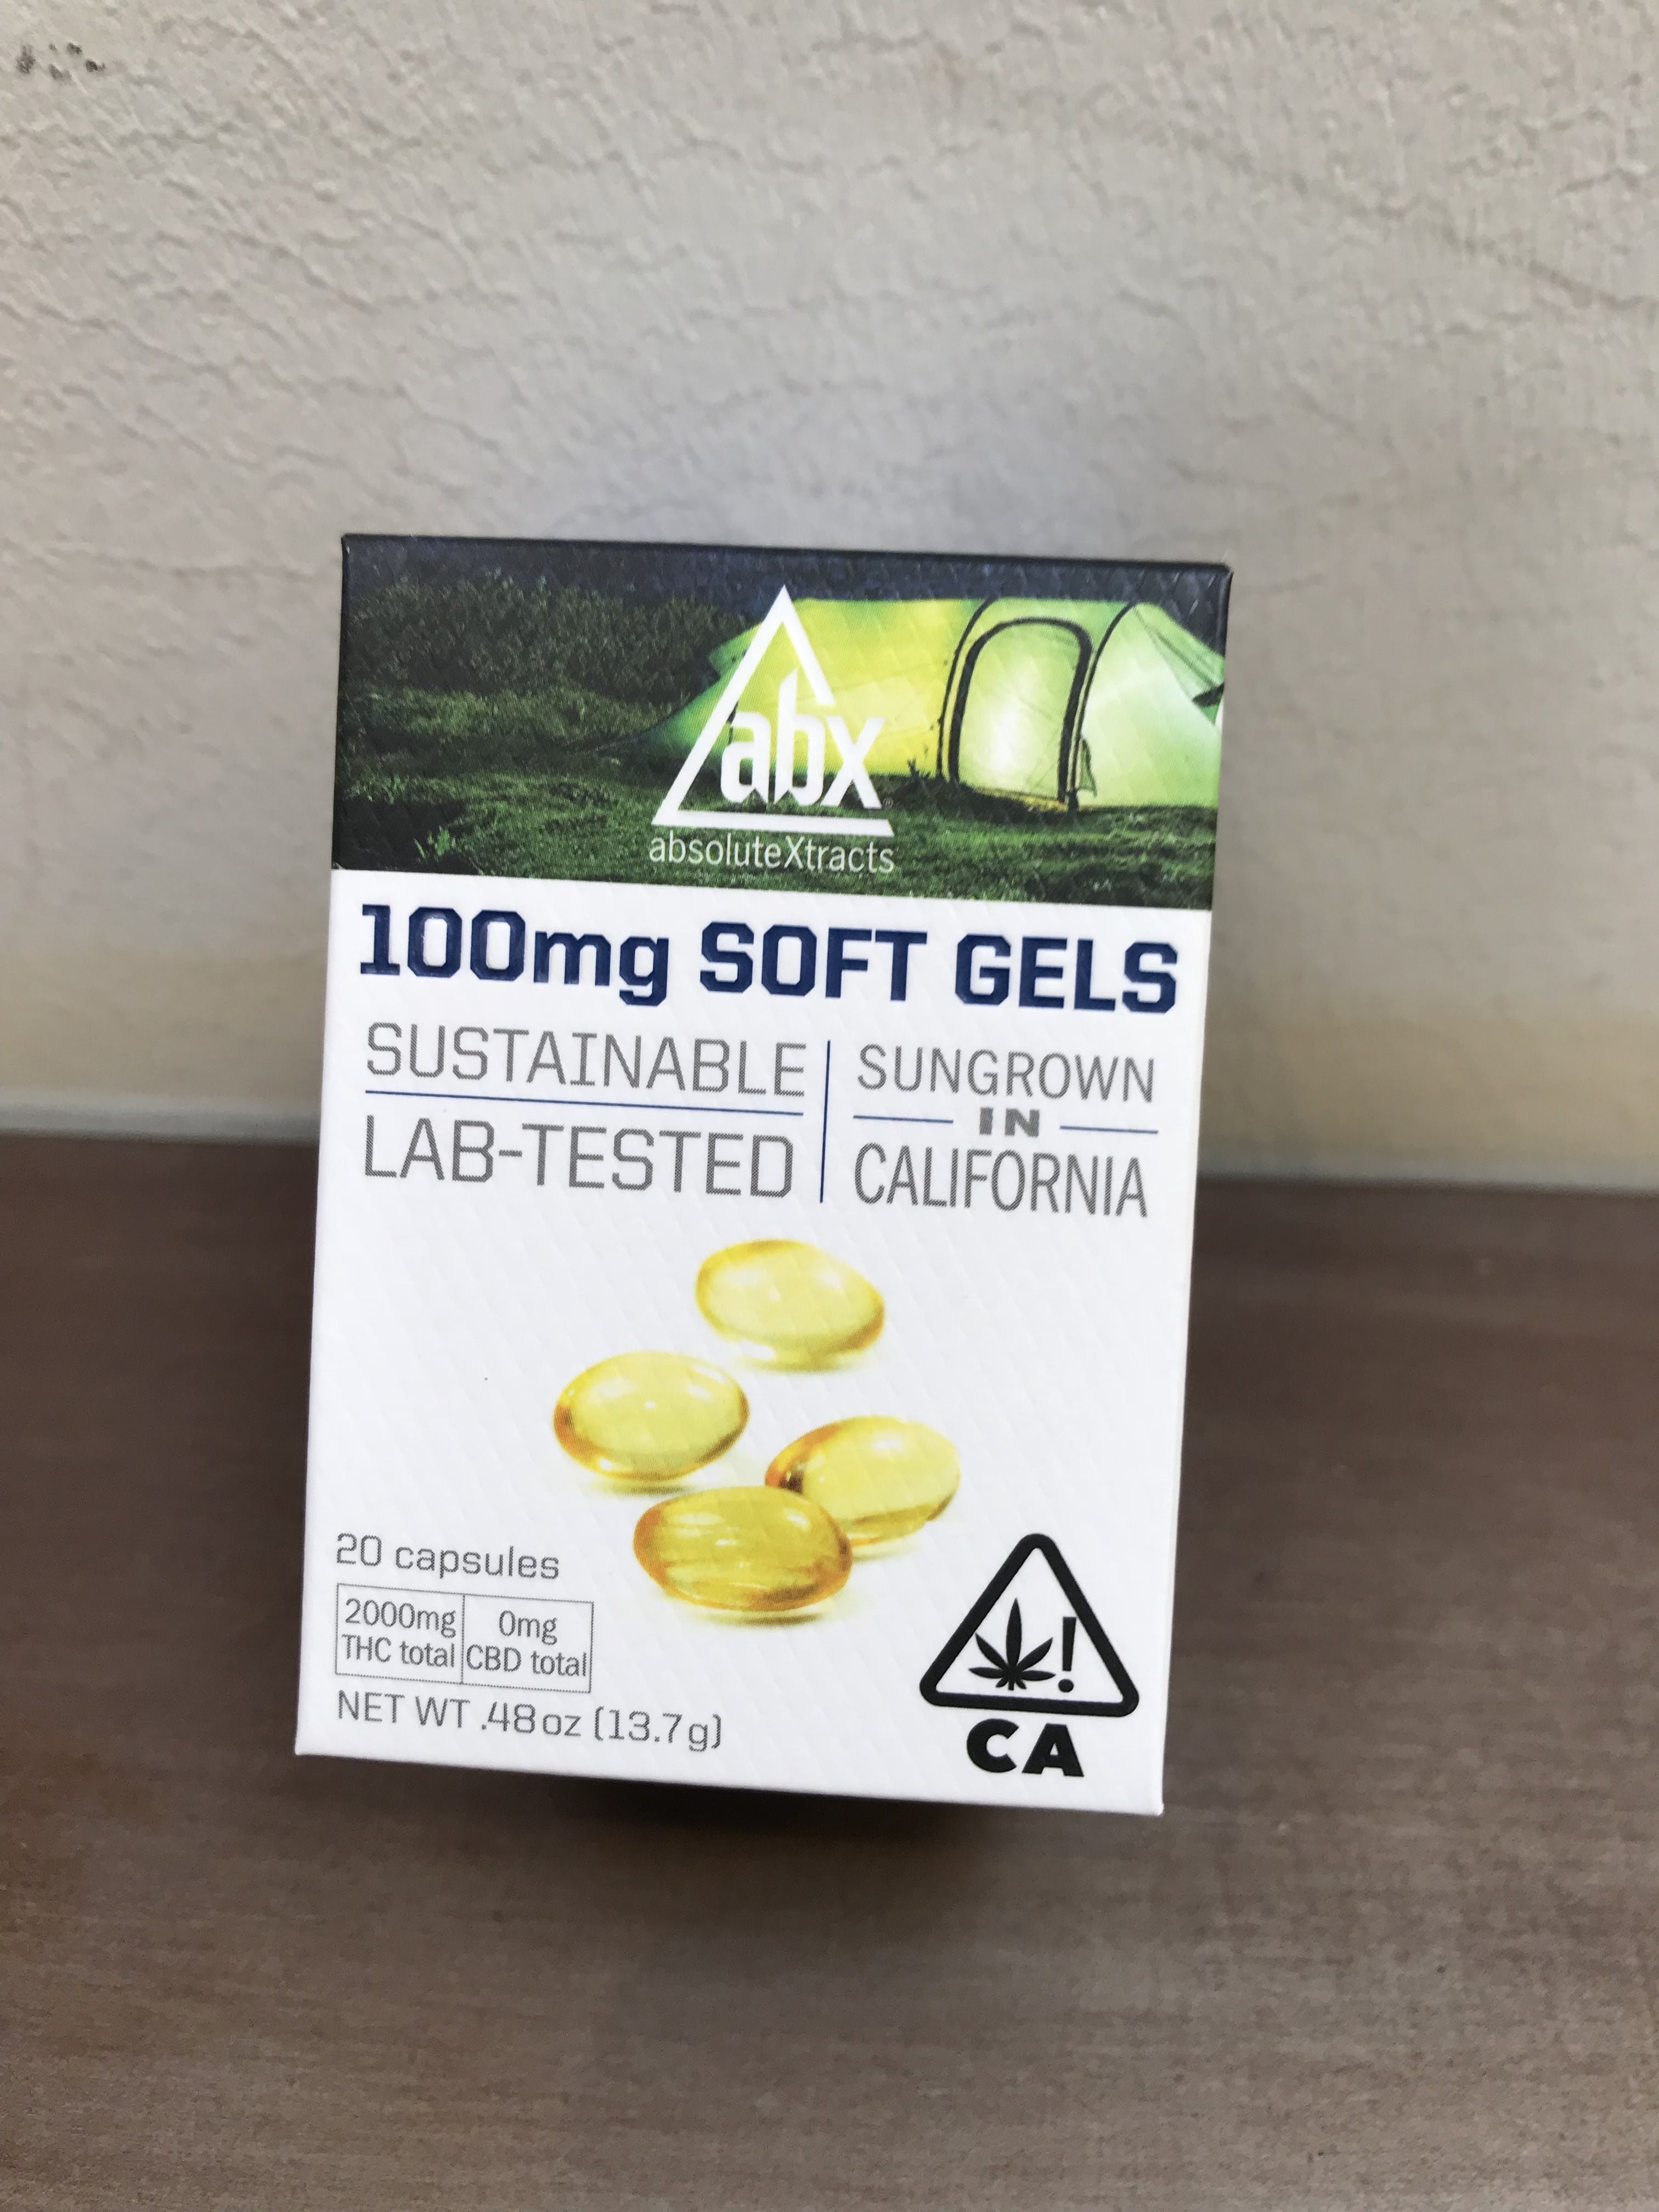 edible-absolutextracts-100mg-soft-gels-20-count